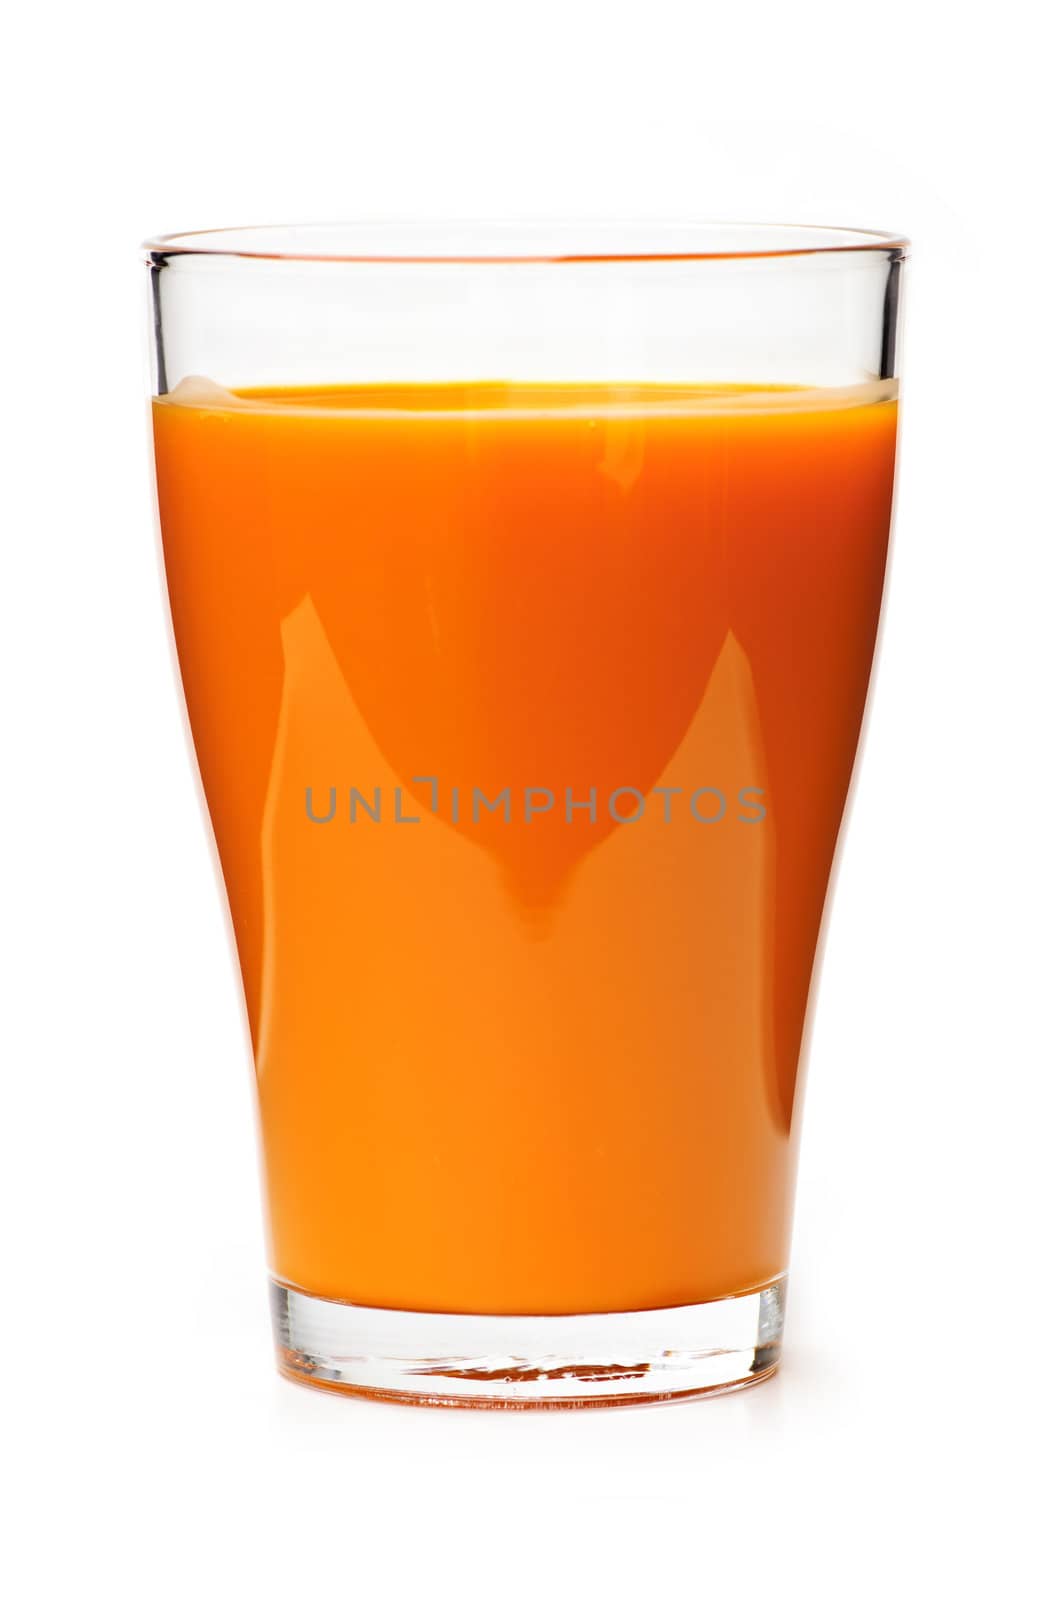 Carrot juice in glass by elenathewise